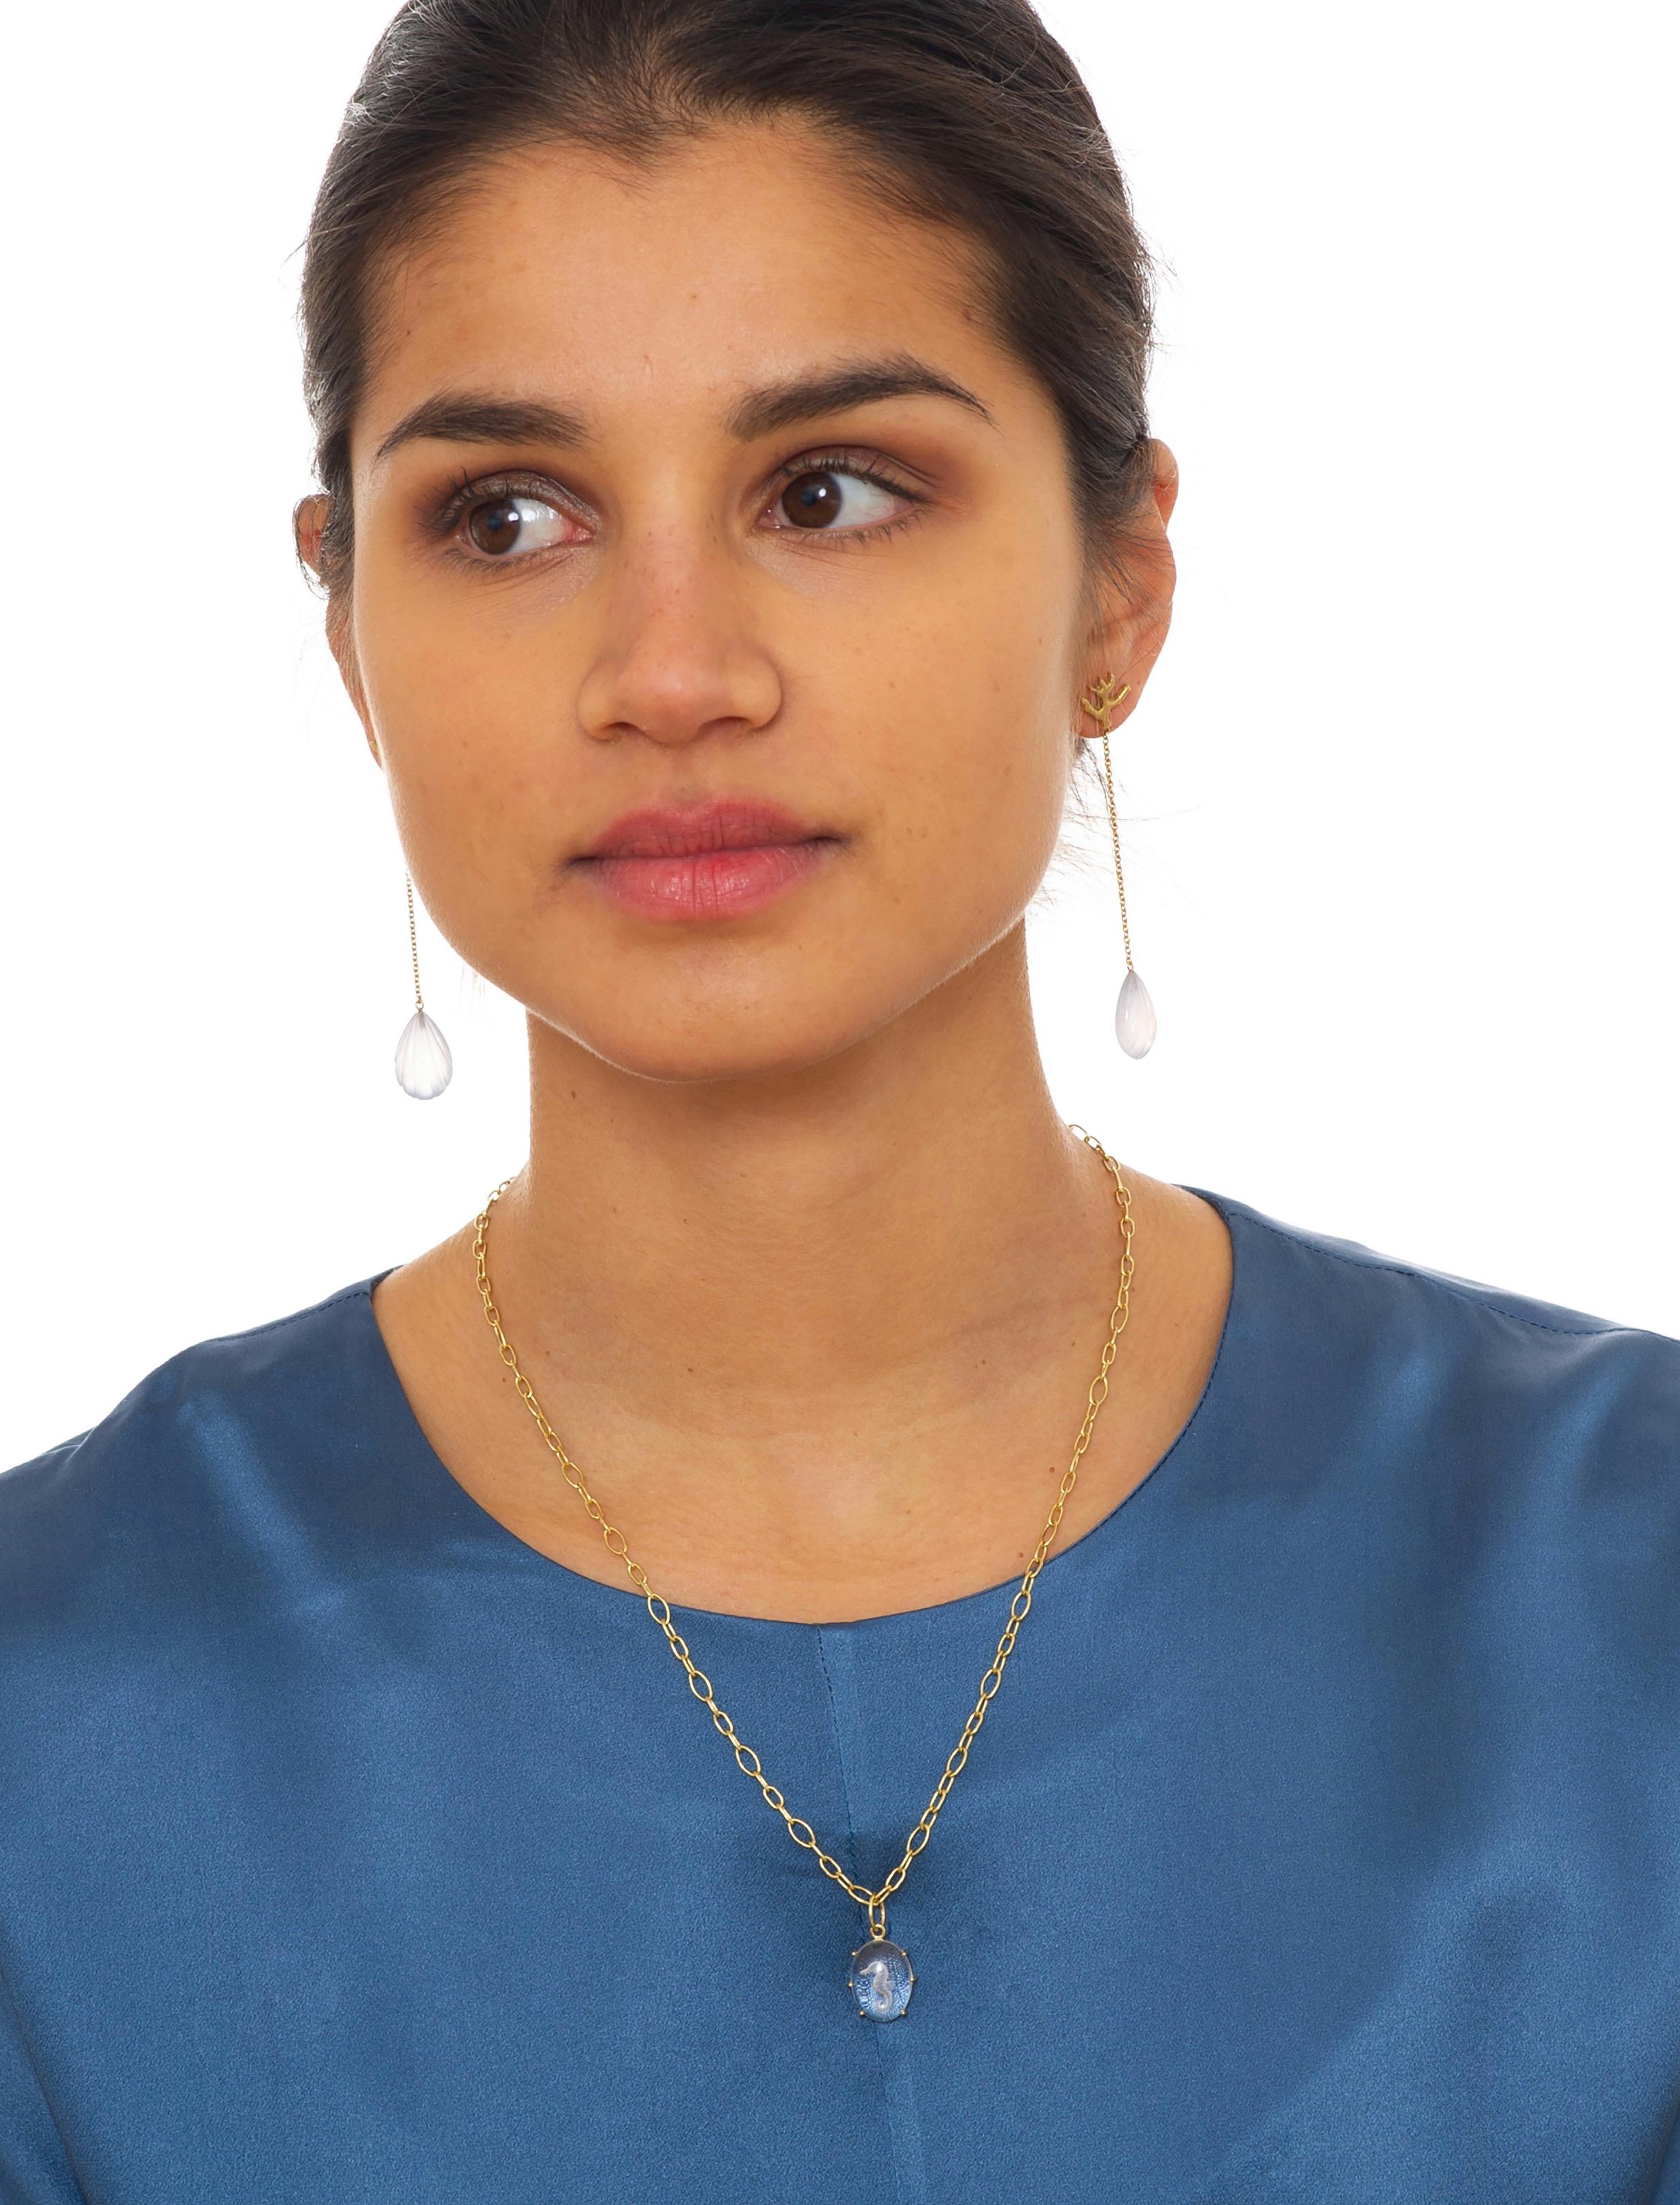 This delicate, handmade chain necklace is a versatile piece of jewelry that can be worn on its own or layered with other necklaces. Each link is crafted individually, resulting in a necklace that is one-of-a-kind.
Because of the hook fastening it